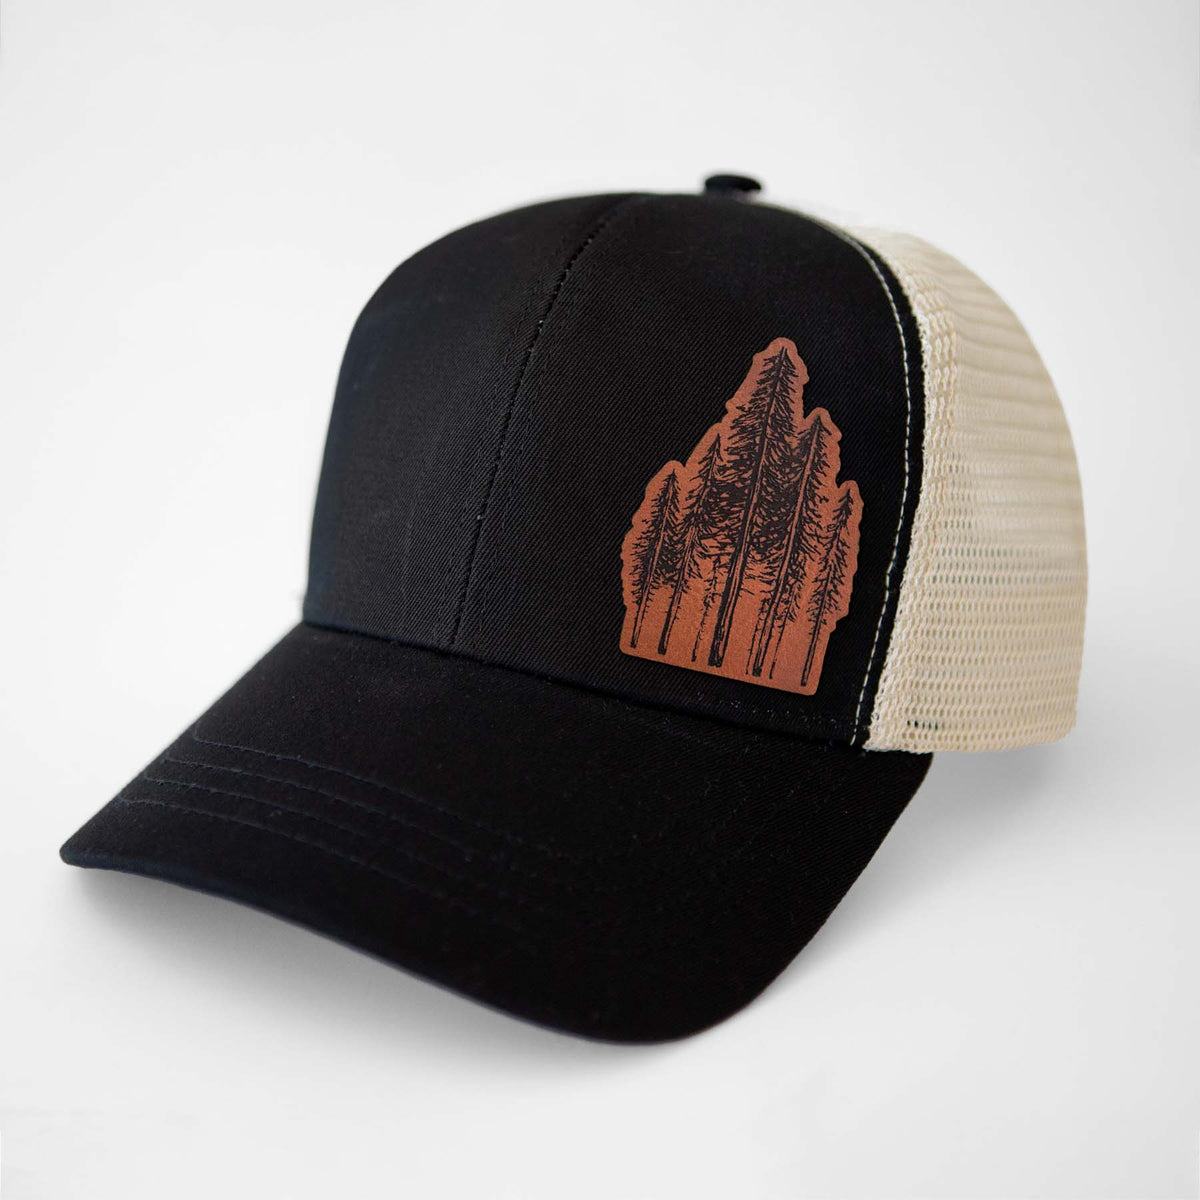 Evergreen - Eco Trucker Hat - Organic and Recycled